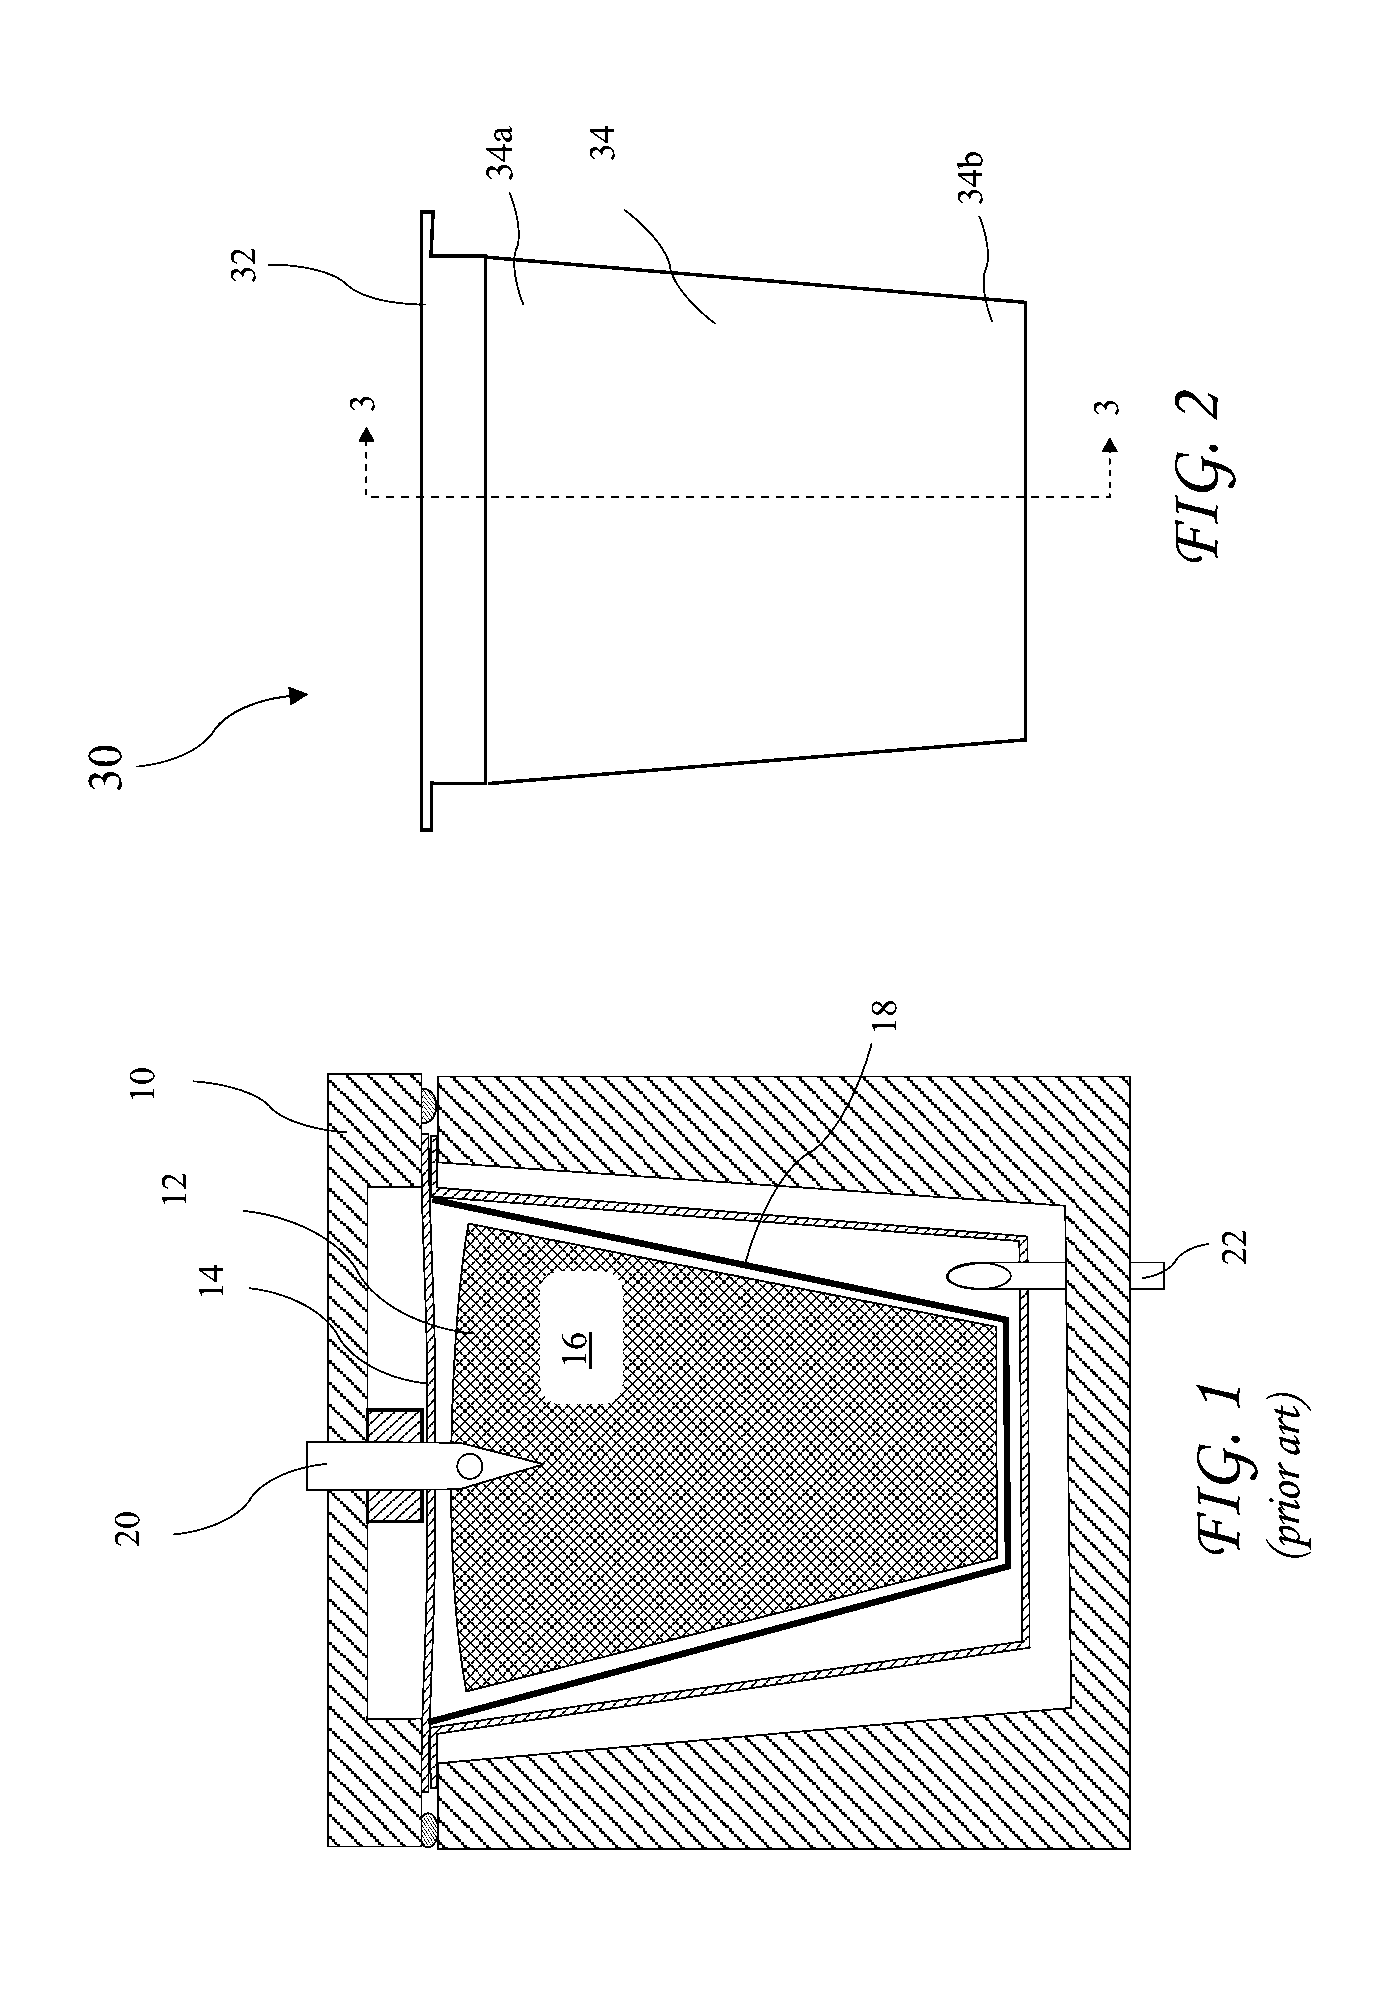 Single Serving Reusable Brewing Material Holder With Offset Passage for Offset Bottom Needle